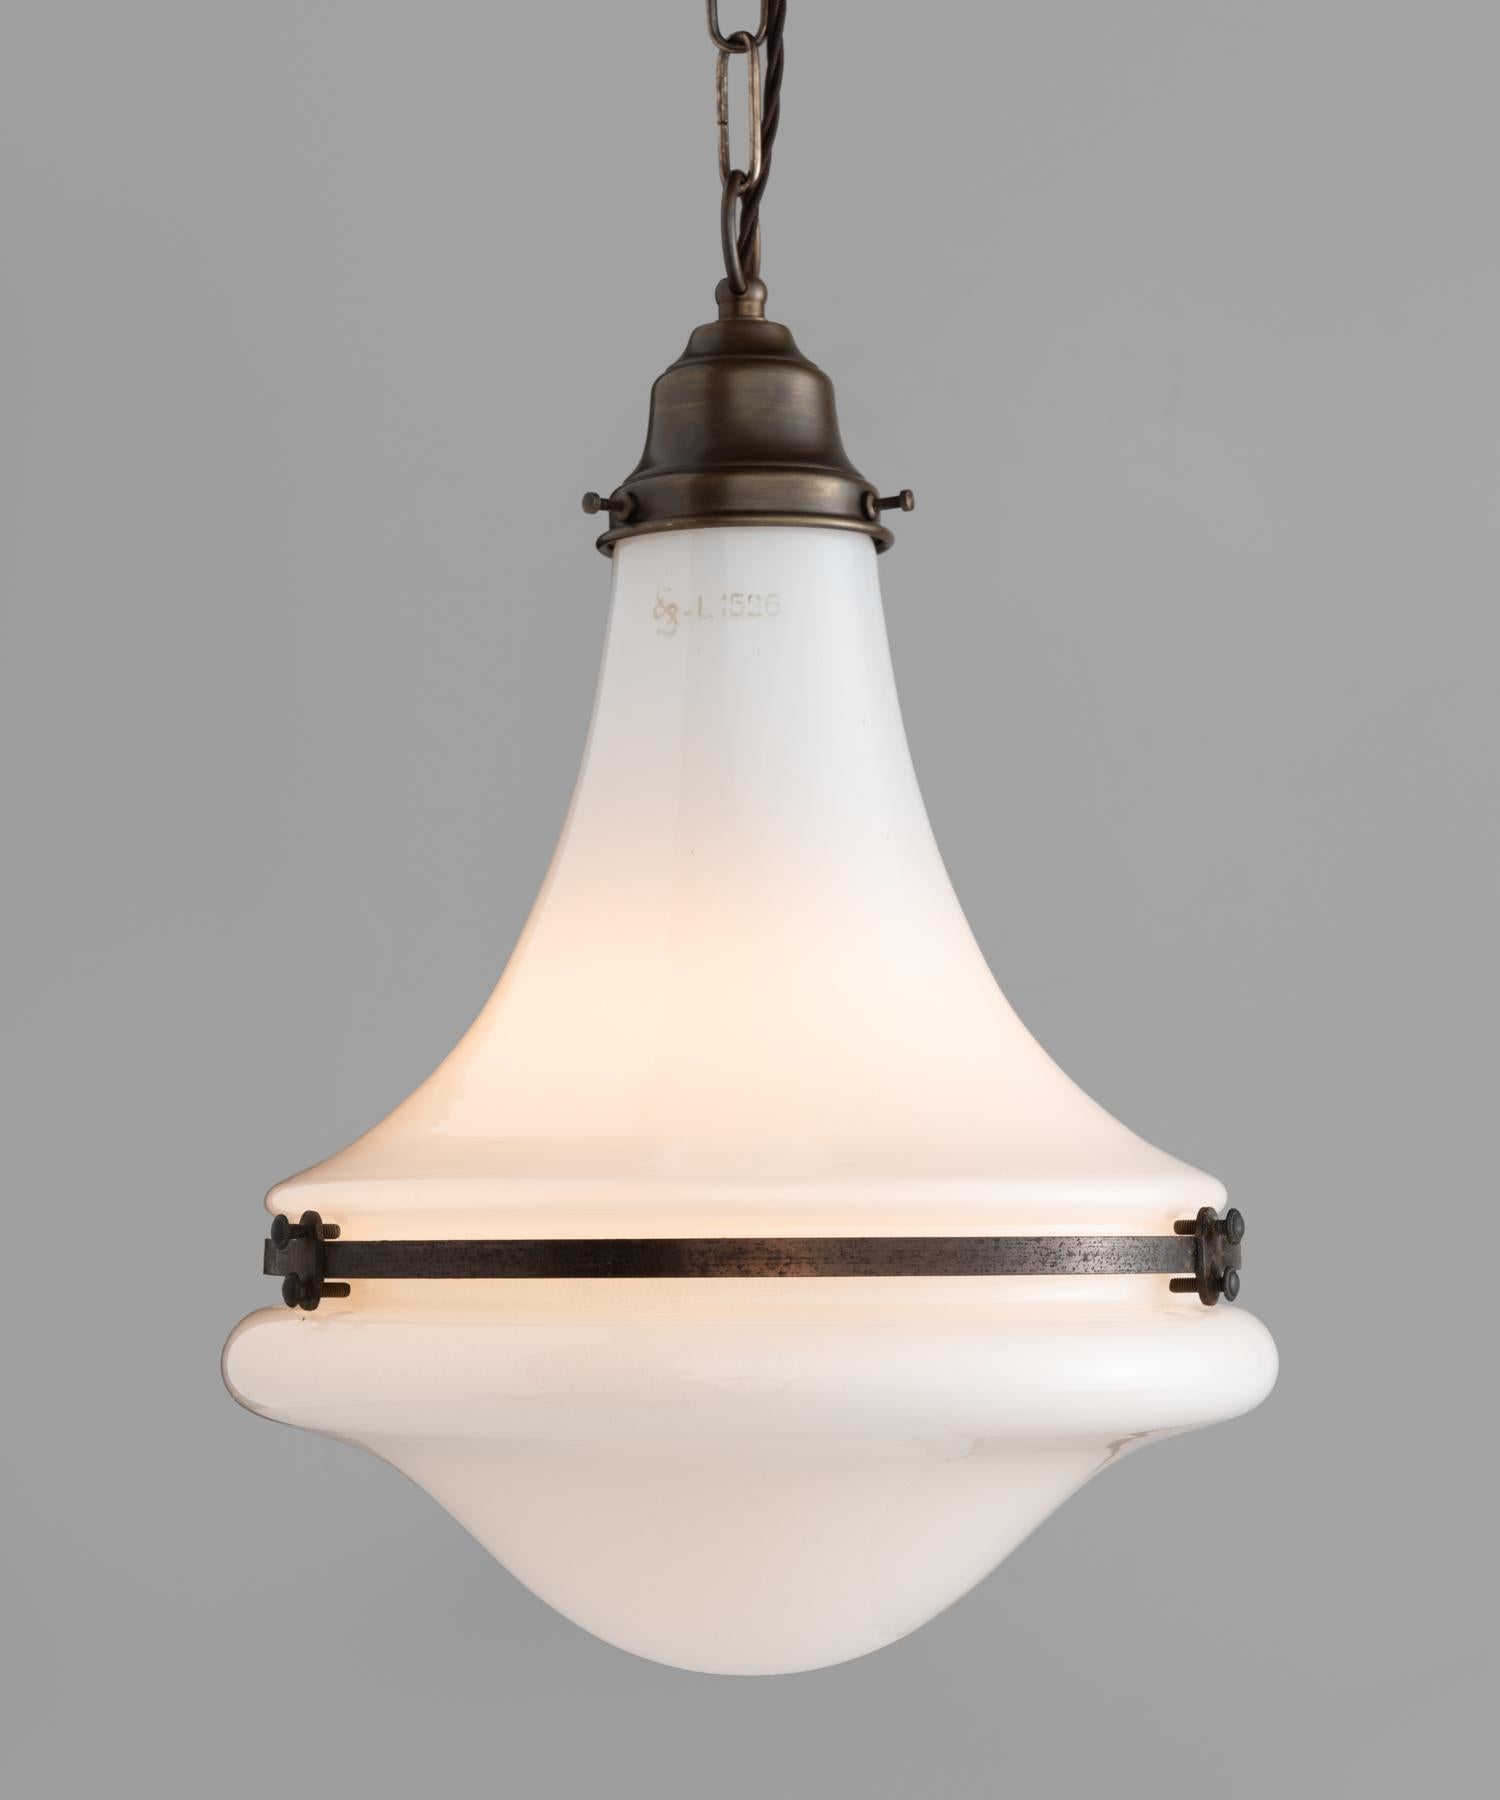 Unique pendant by Siemens, circa 1930.

Opaline shades with brass hardware and beautiful patina. Drop is adjustable.

Measures: 9.5